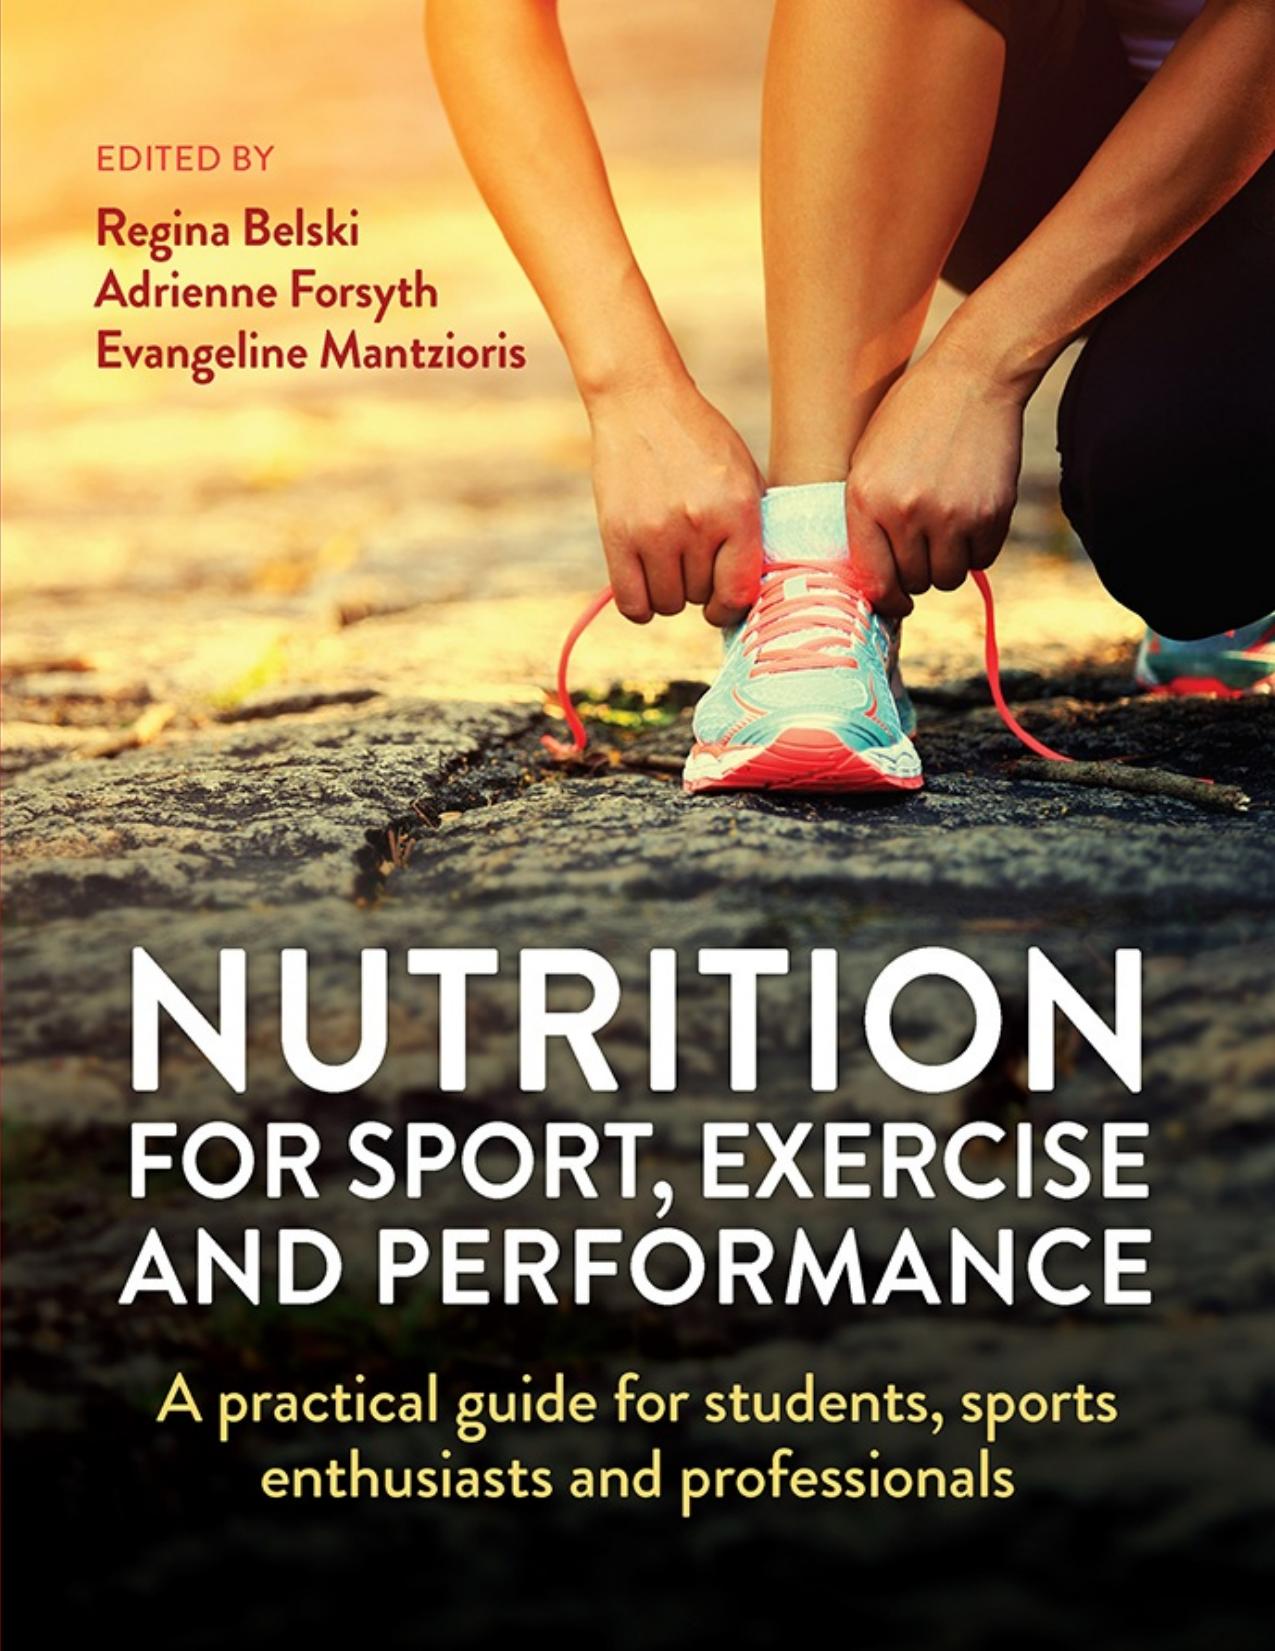 Nutrition for Sport, Exercise and Performance: A practical guide for students, sports enthusiasts and professionals - PDFDrive.com